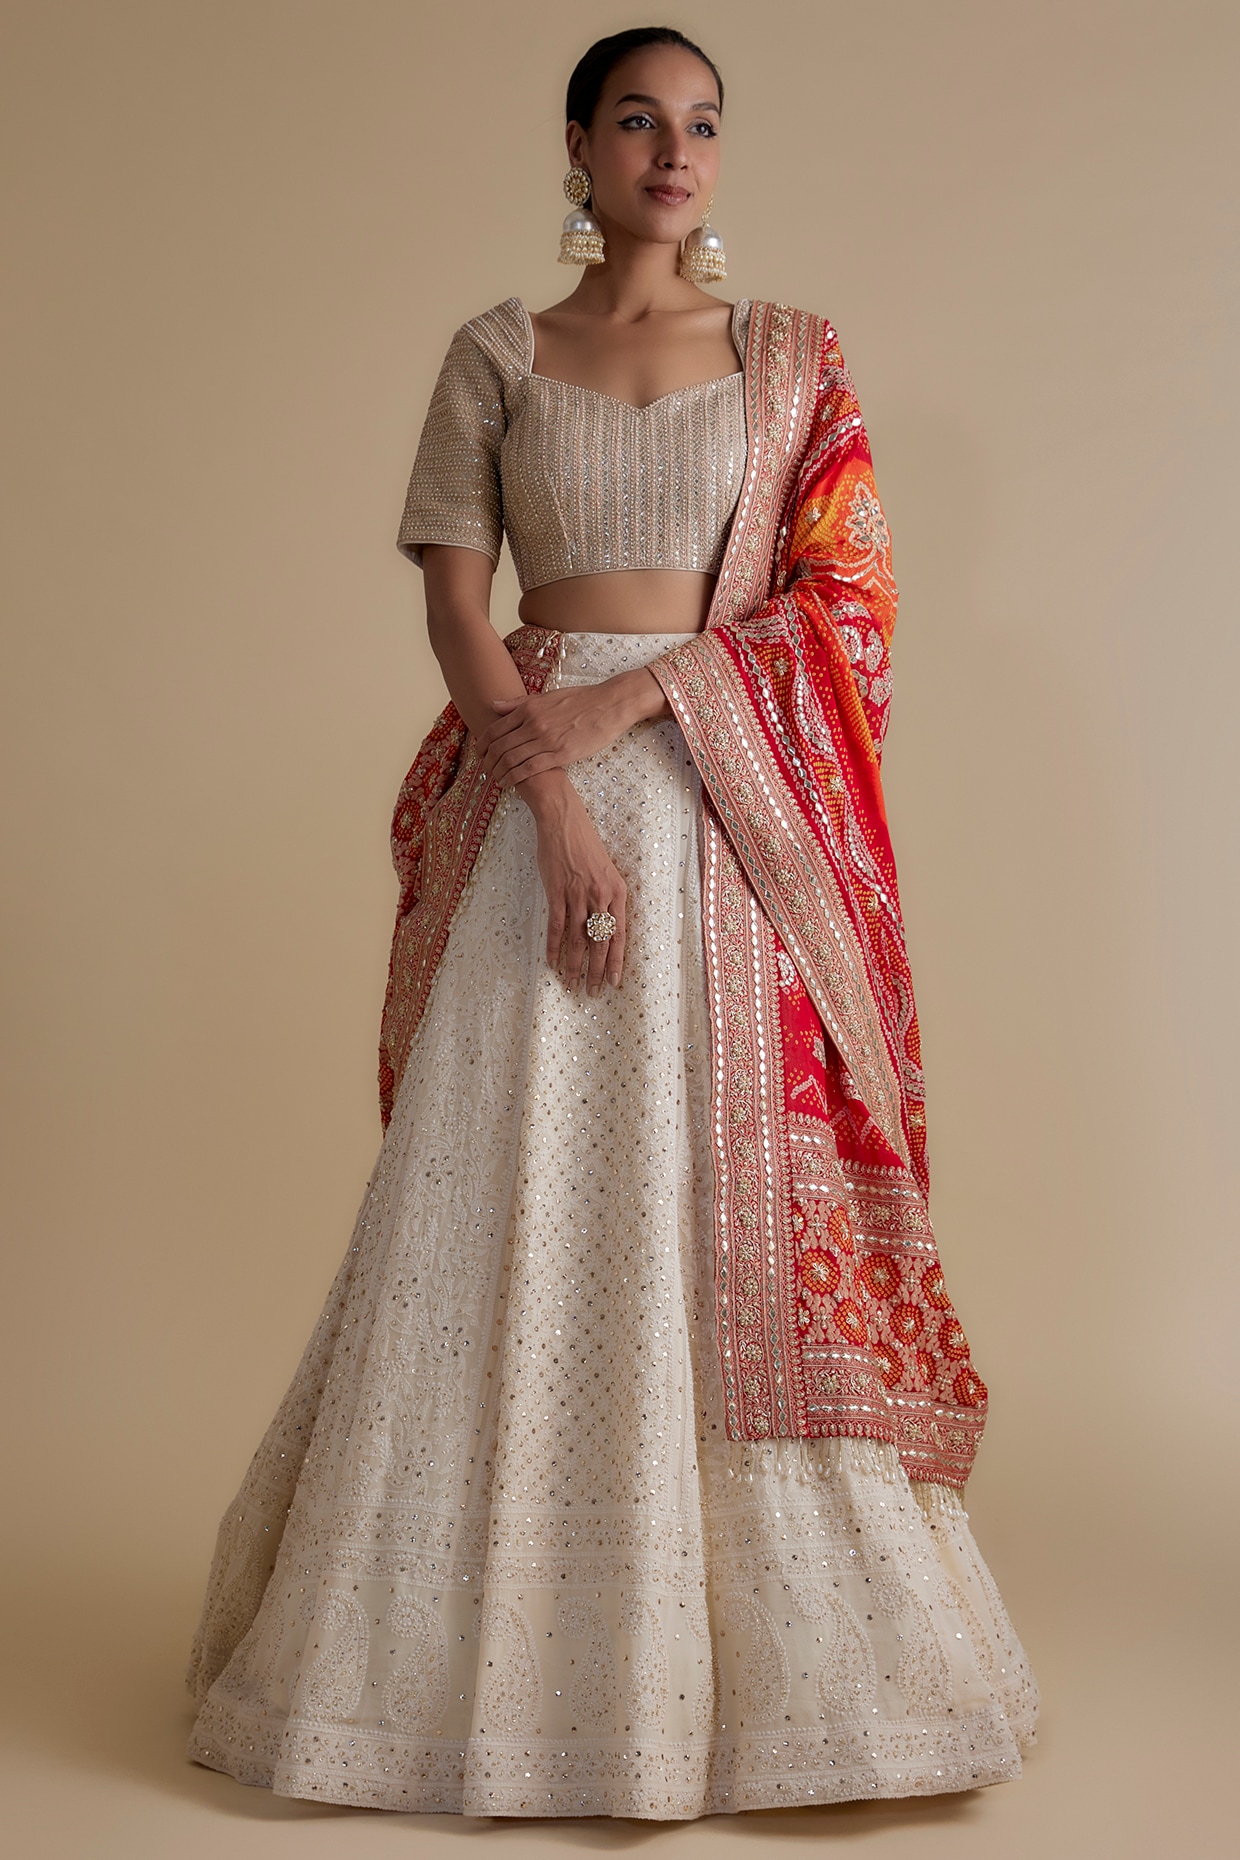 A woman in a white and red lehenga photo – Free Surat Image on Unsplash